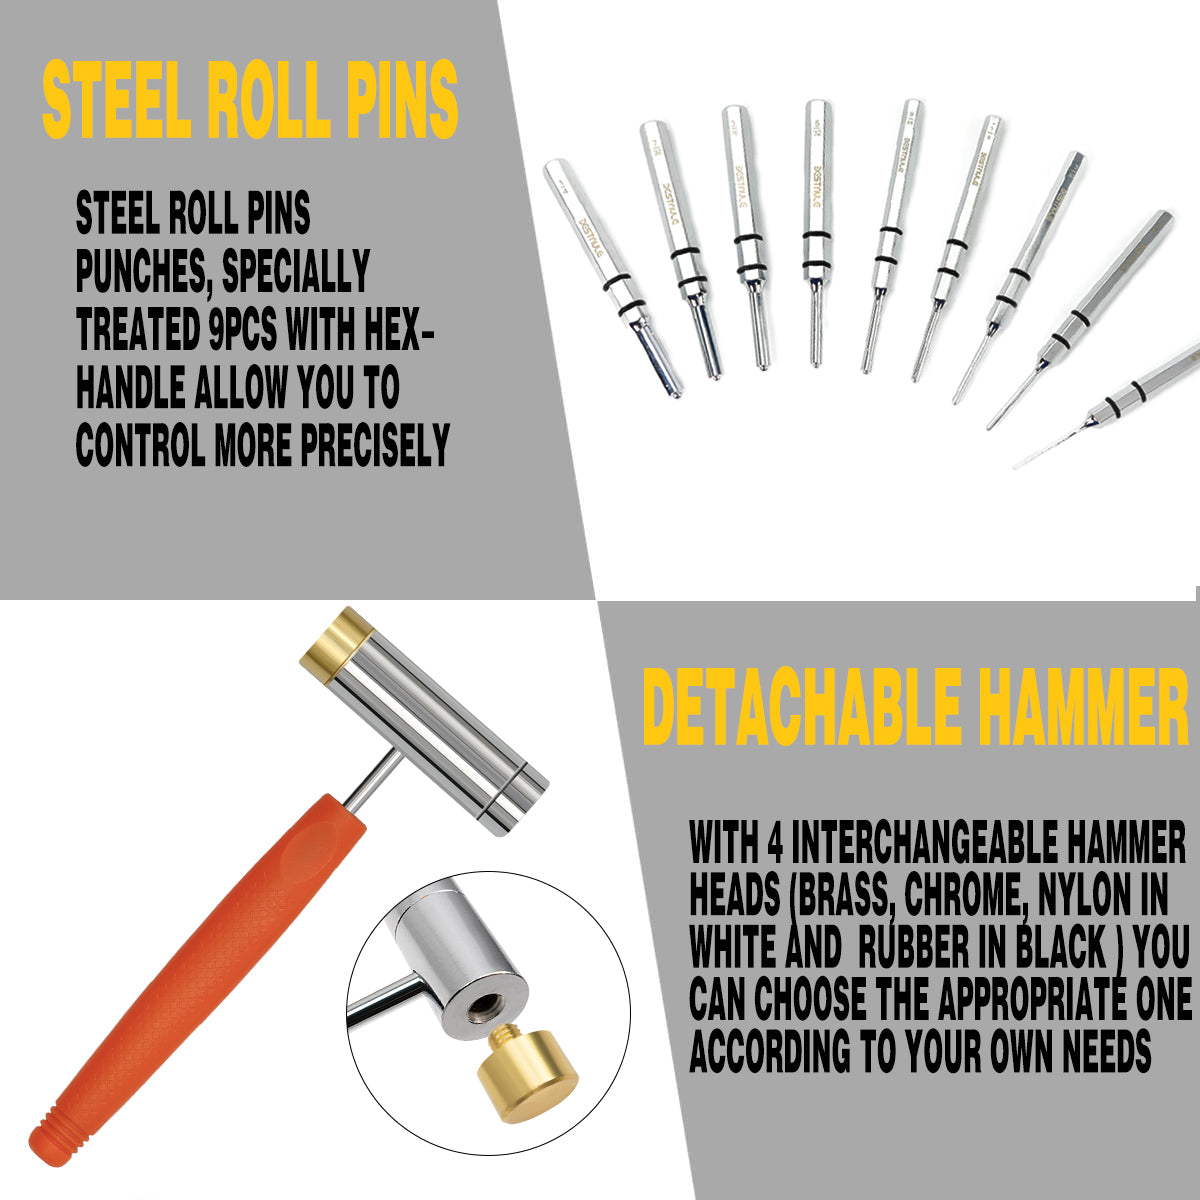 BESTNULE Punch Set, Punch Tools, Roll Pin Punch Set, Made of Solid Material Including Steel Punches and Hammer, Ideal for Maintenance